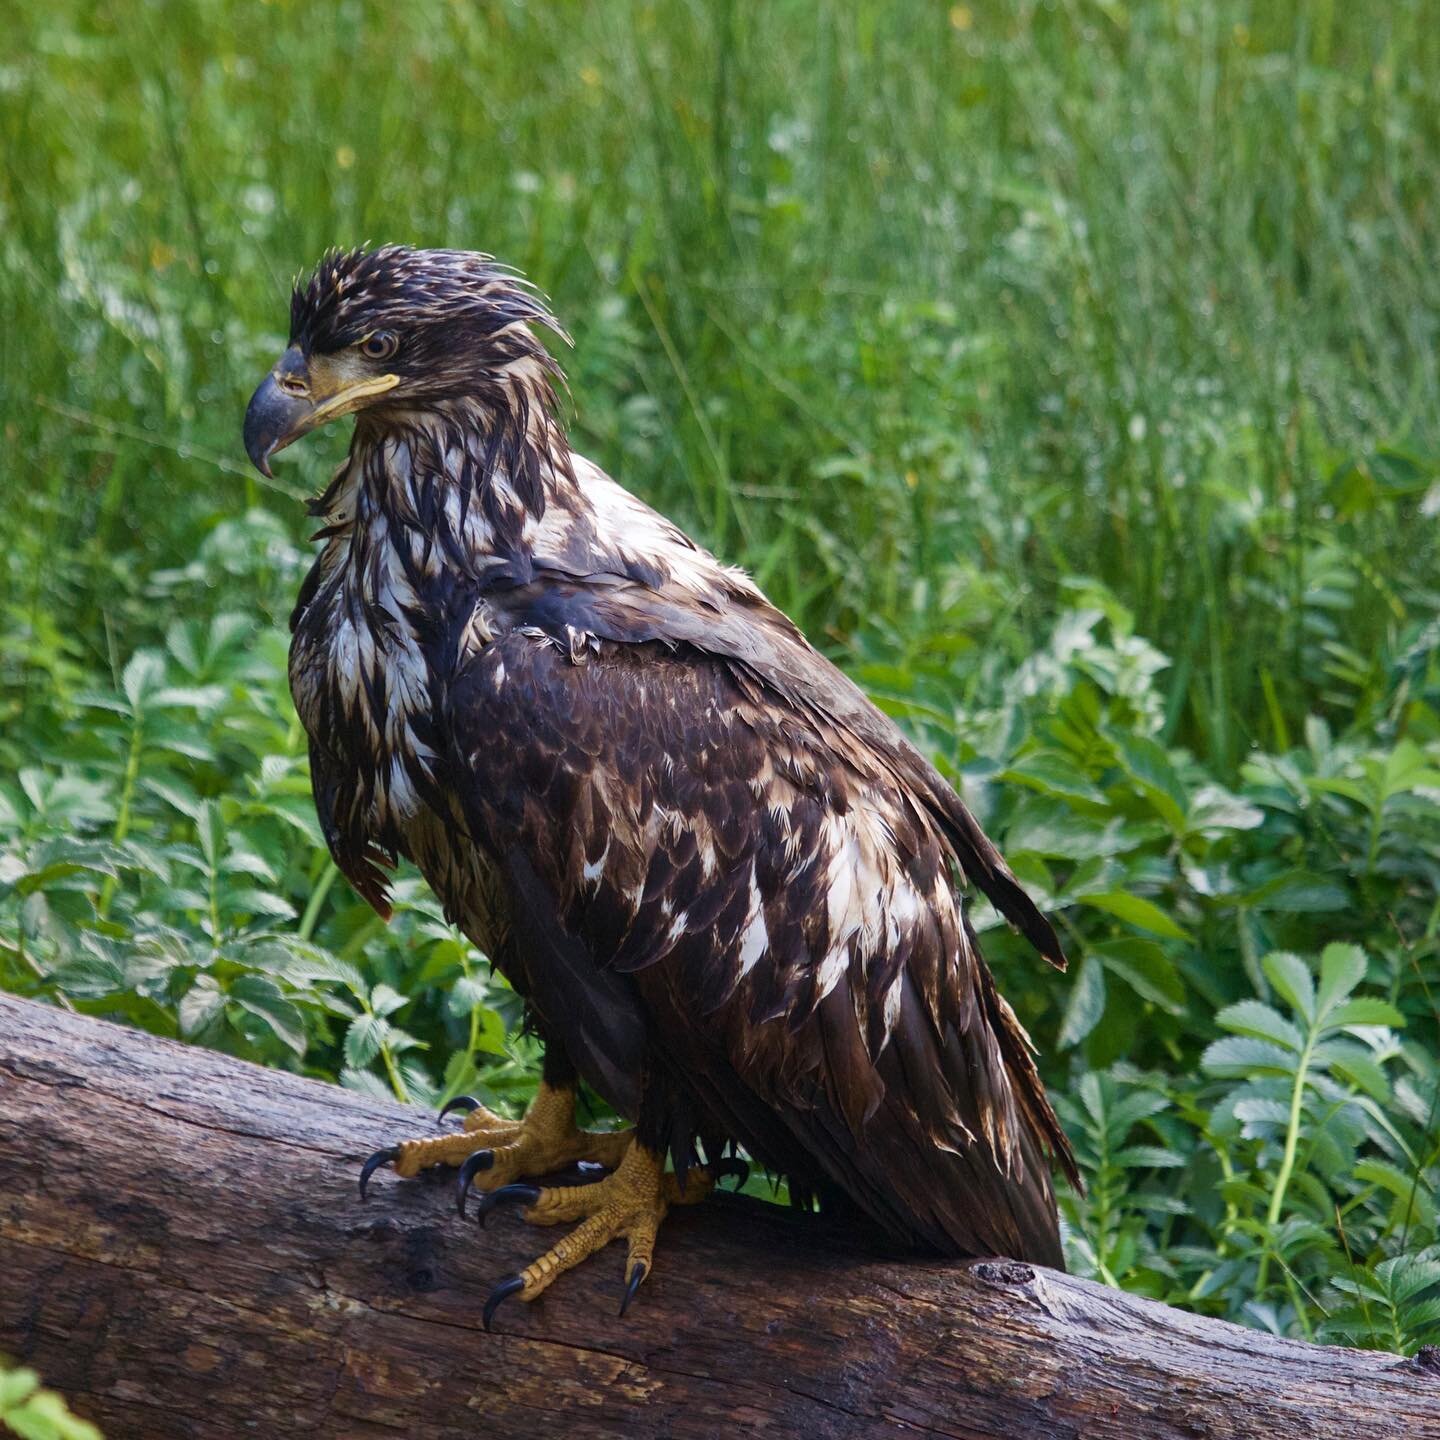 An Immature Bald Eagle drying off after an unexpected dip in the ocean near Tofino. 

Did you know that Bald Eagles have a wing span of 7ft and can weigh up to 15 pounds. They are one of the largest raptors in the world.

When diving they can reach s